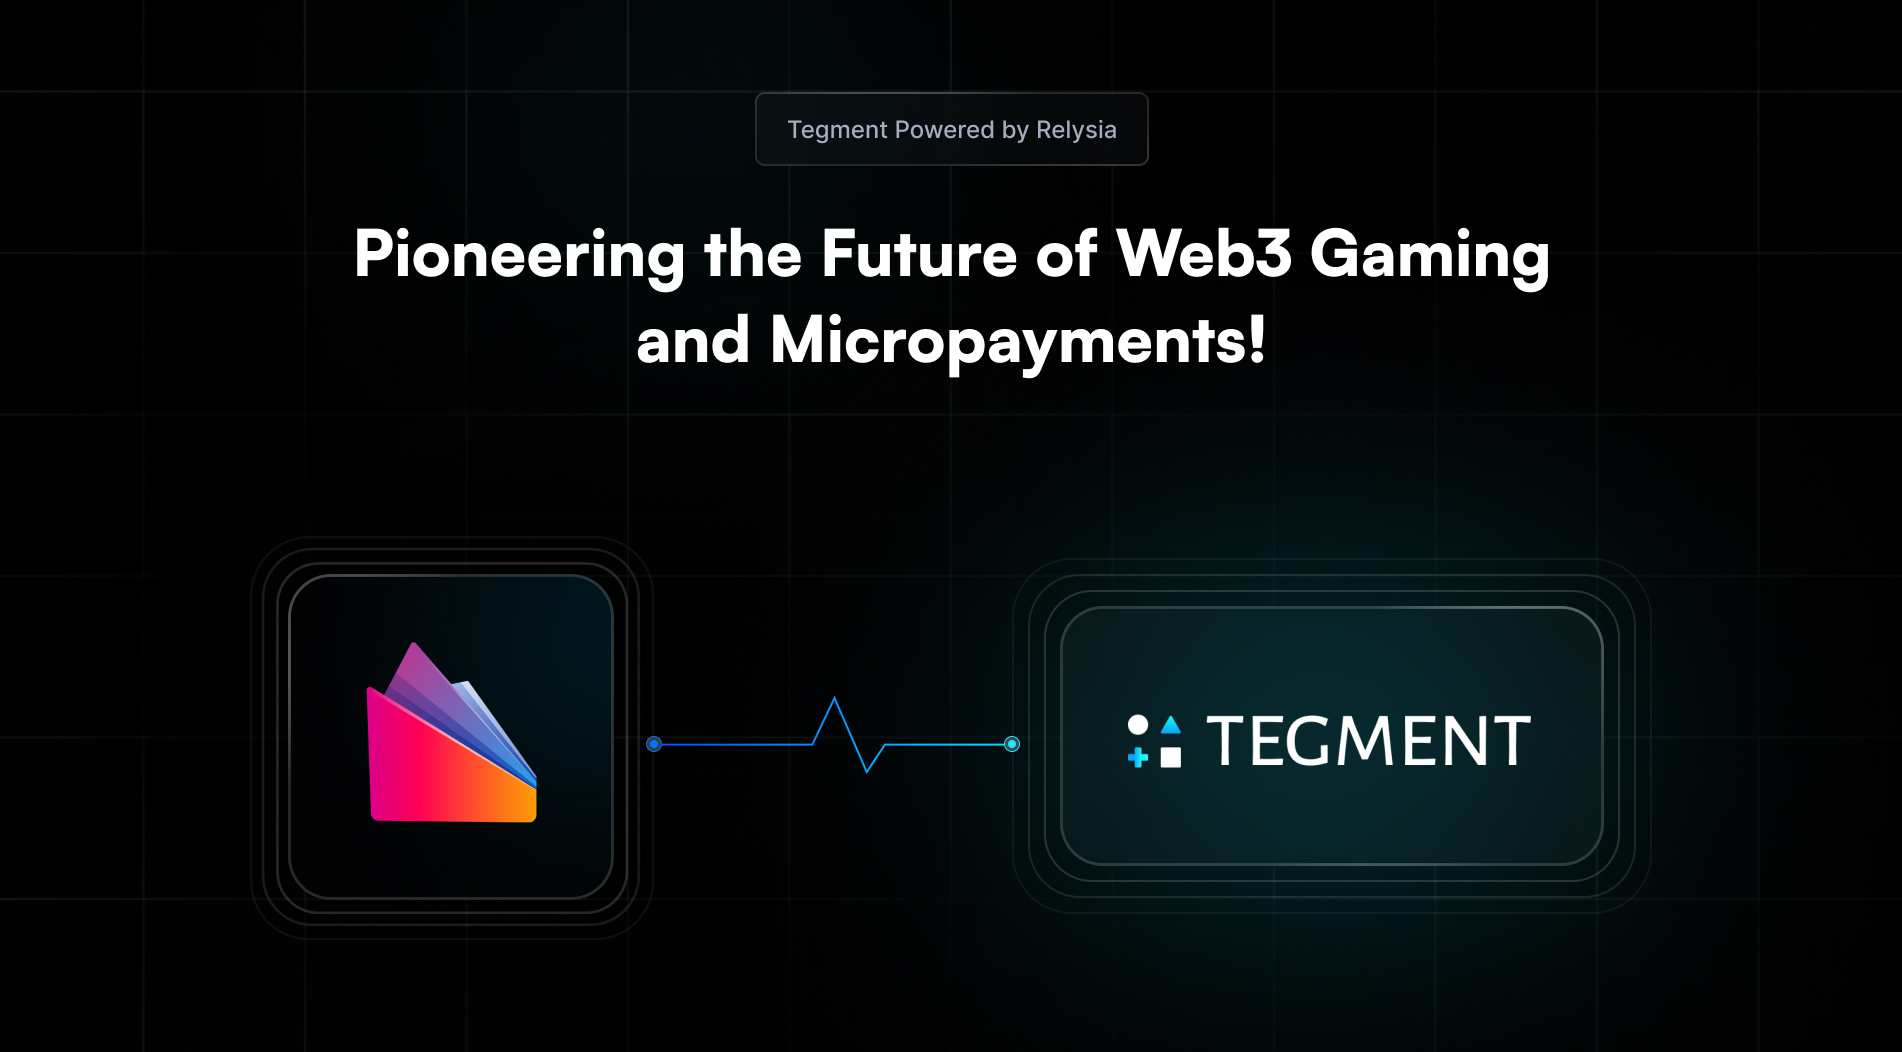 Relysia & Tegment: The Future of Web3 Gaming and Micro Payments